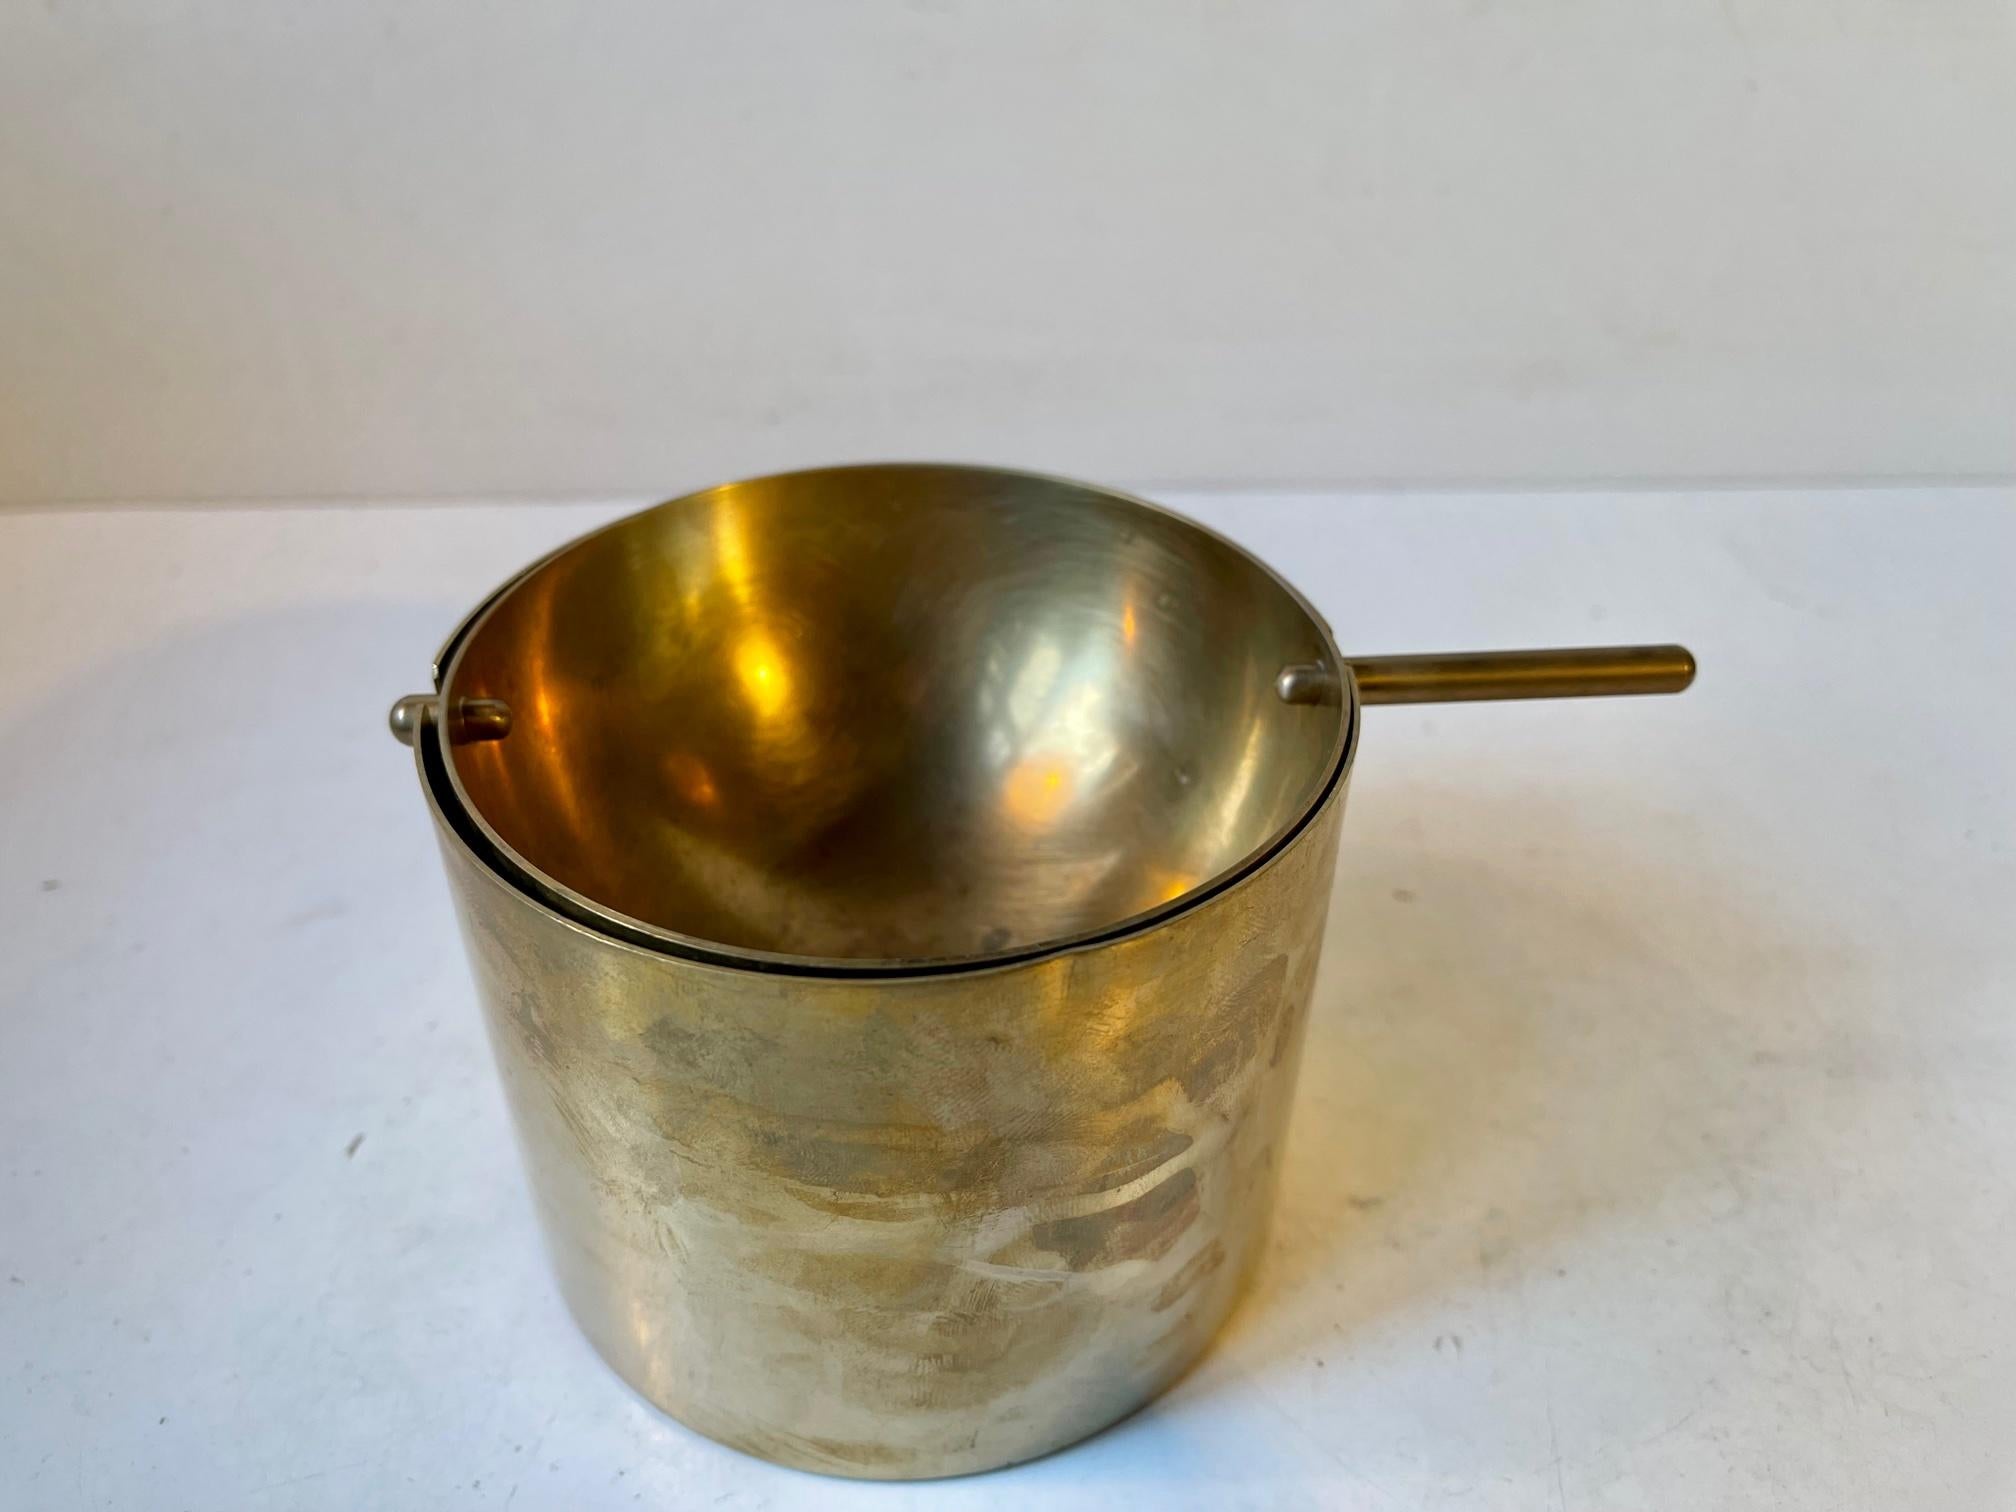 This brass version of the Cylinda-line ashtray was designed by Arne Jacobsen and manufactured by Stelton in a limited run from 1965-67. This, the large version or Cigar Ashtray, is by far the rarest of the two sizes they came in. The nice thing